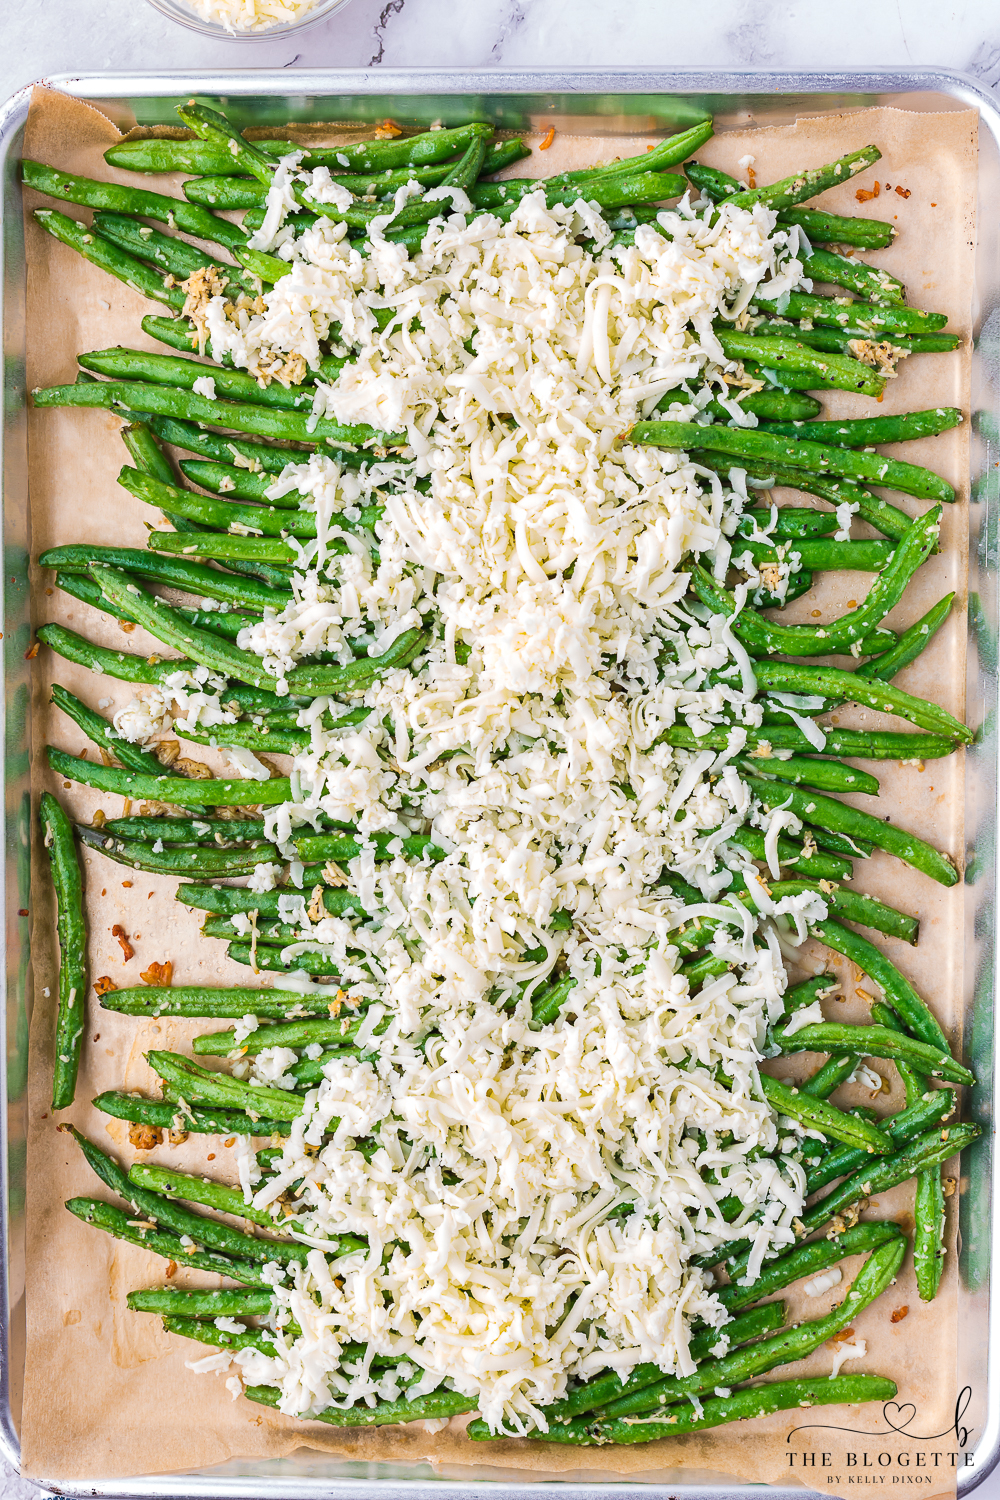 Cheese over green beans